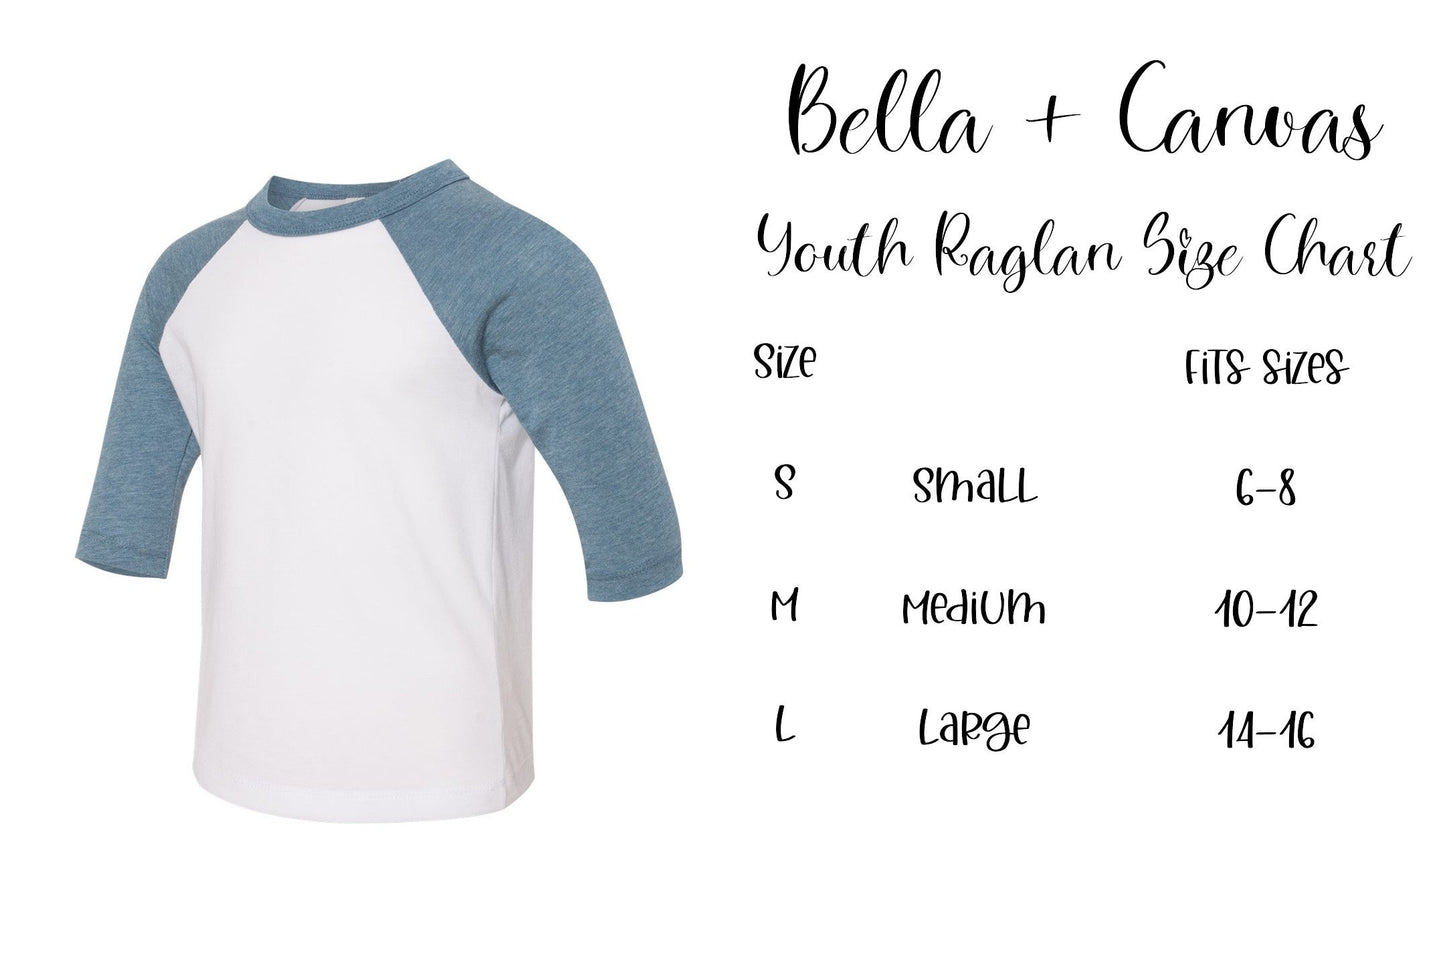 Boy Girl Twins Toddler or Kids Bella + Canvas Raglan Tee - shirts for twins - fraternal twins - gift for boy girl twins - twin toddlers